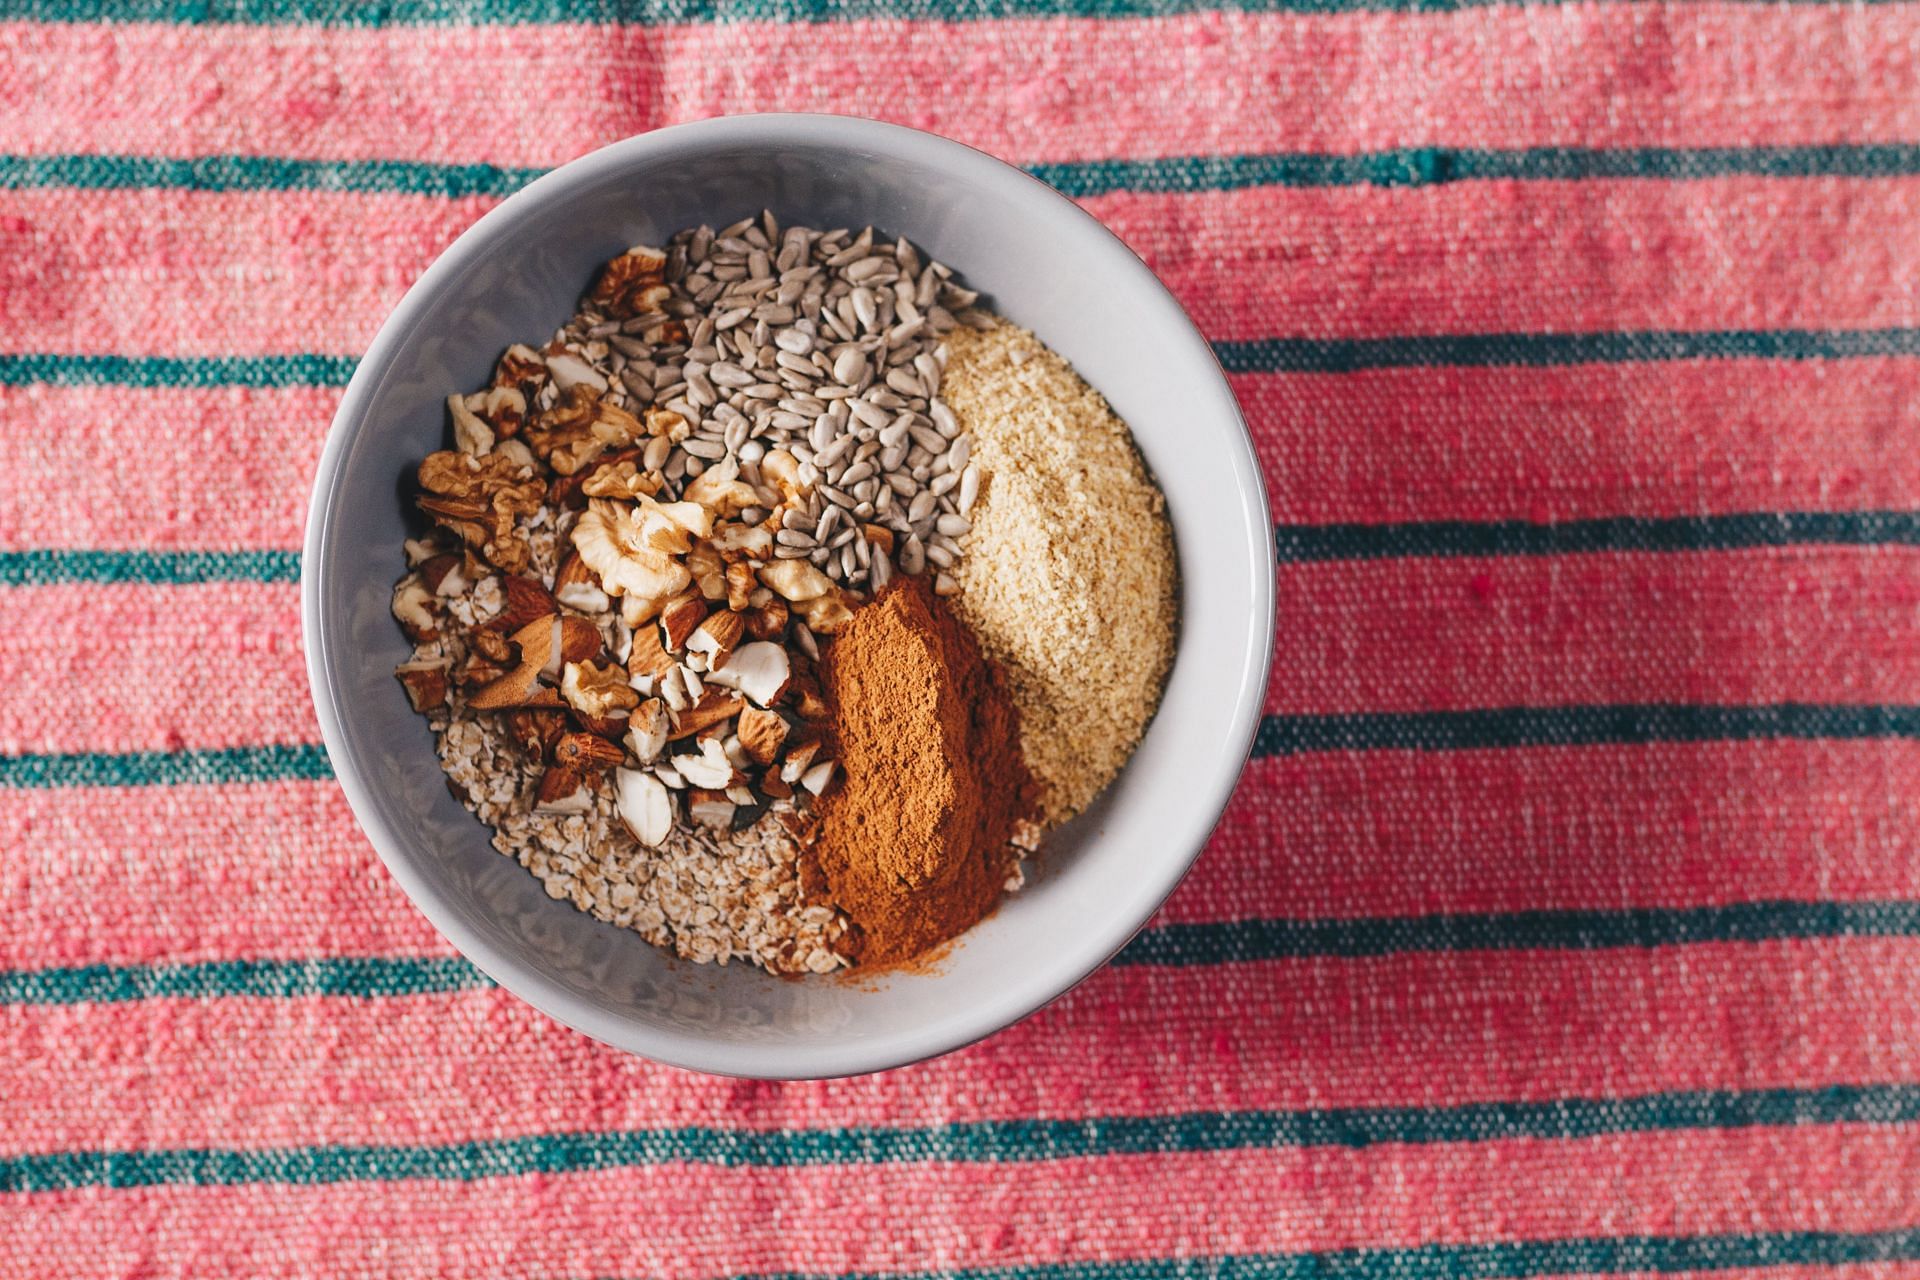 Add seeds and nuts to your diet for maximum benefits (Image via Pexels)